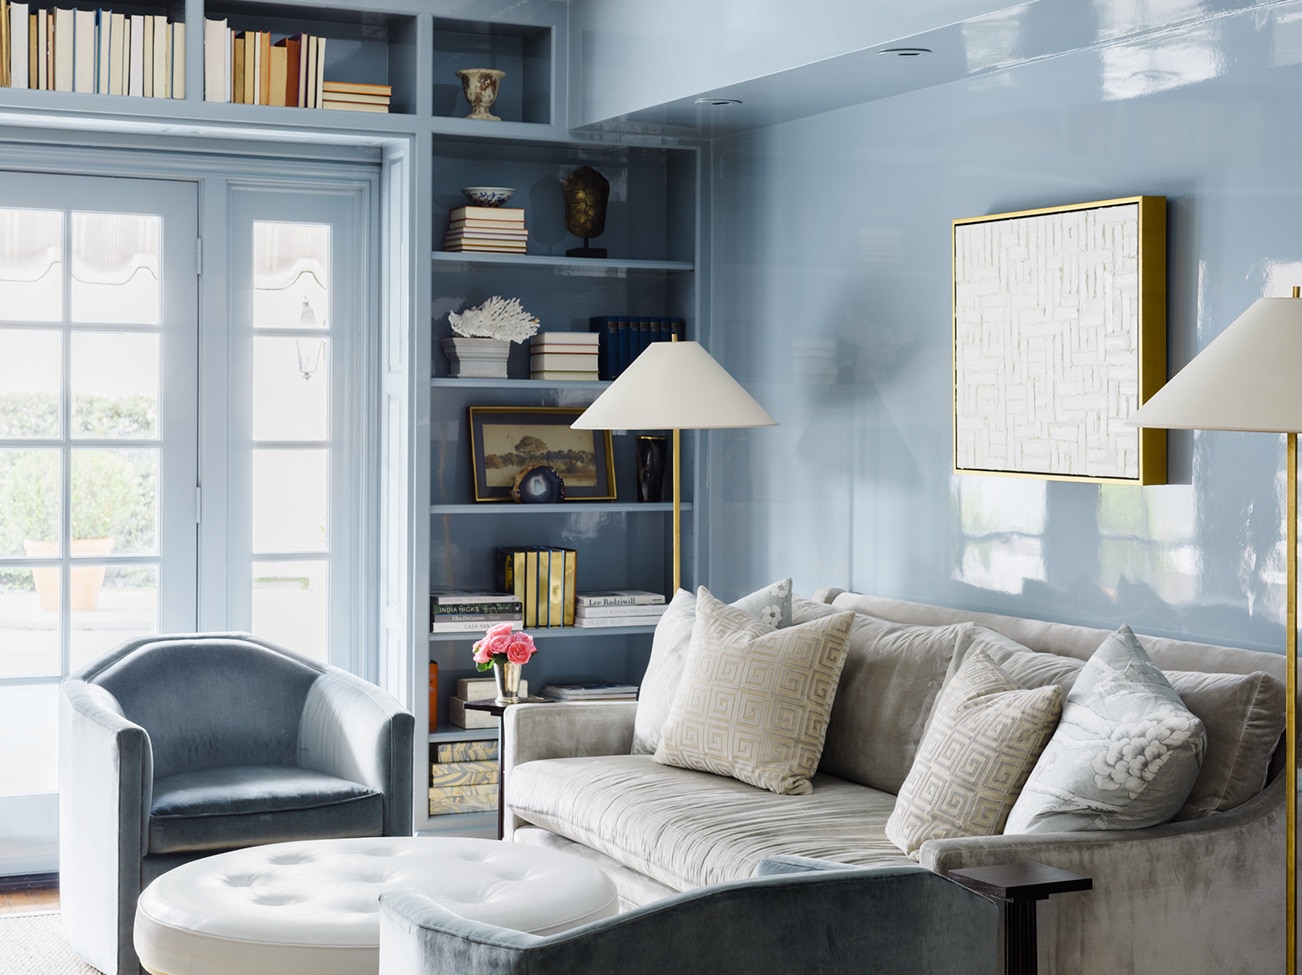 A pale blue, high gloss-painted study, gray couch, white leather ottoman, blue chairs, and a light-filled French door.